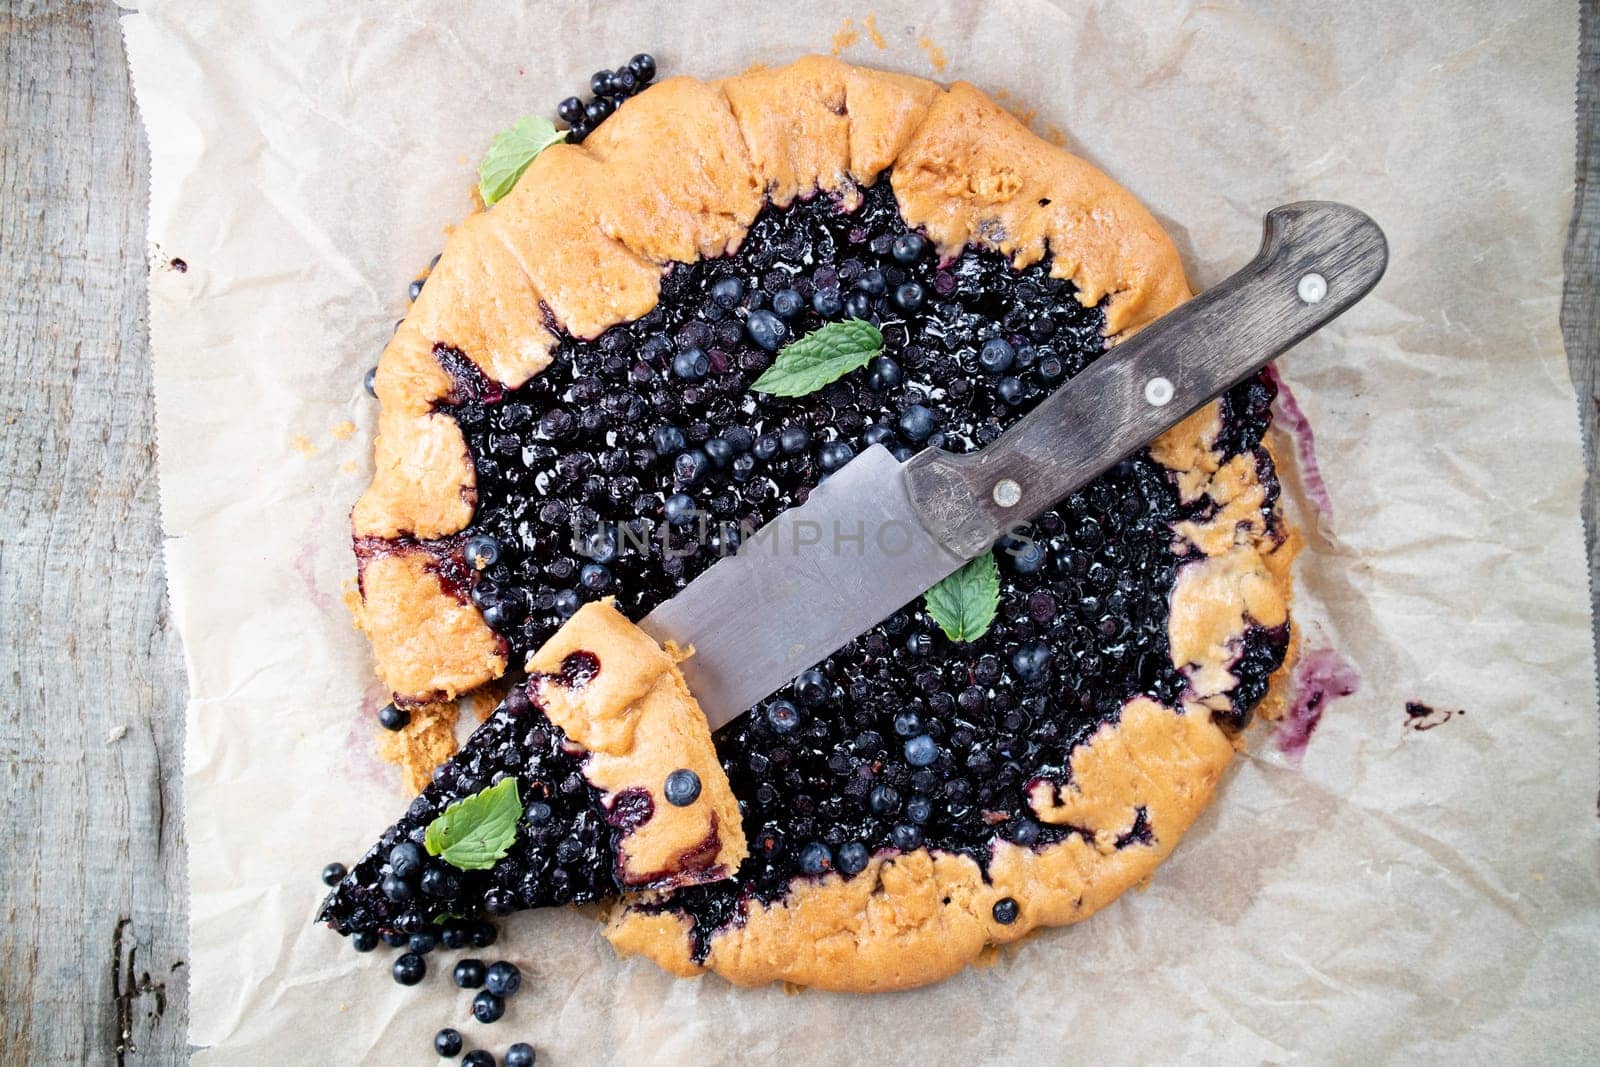 Rustic presentation of a wild blueberry-based cake by fotografiche.eu